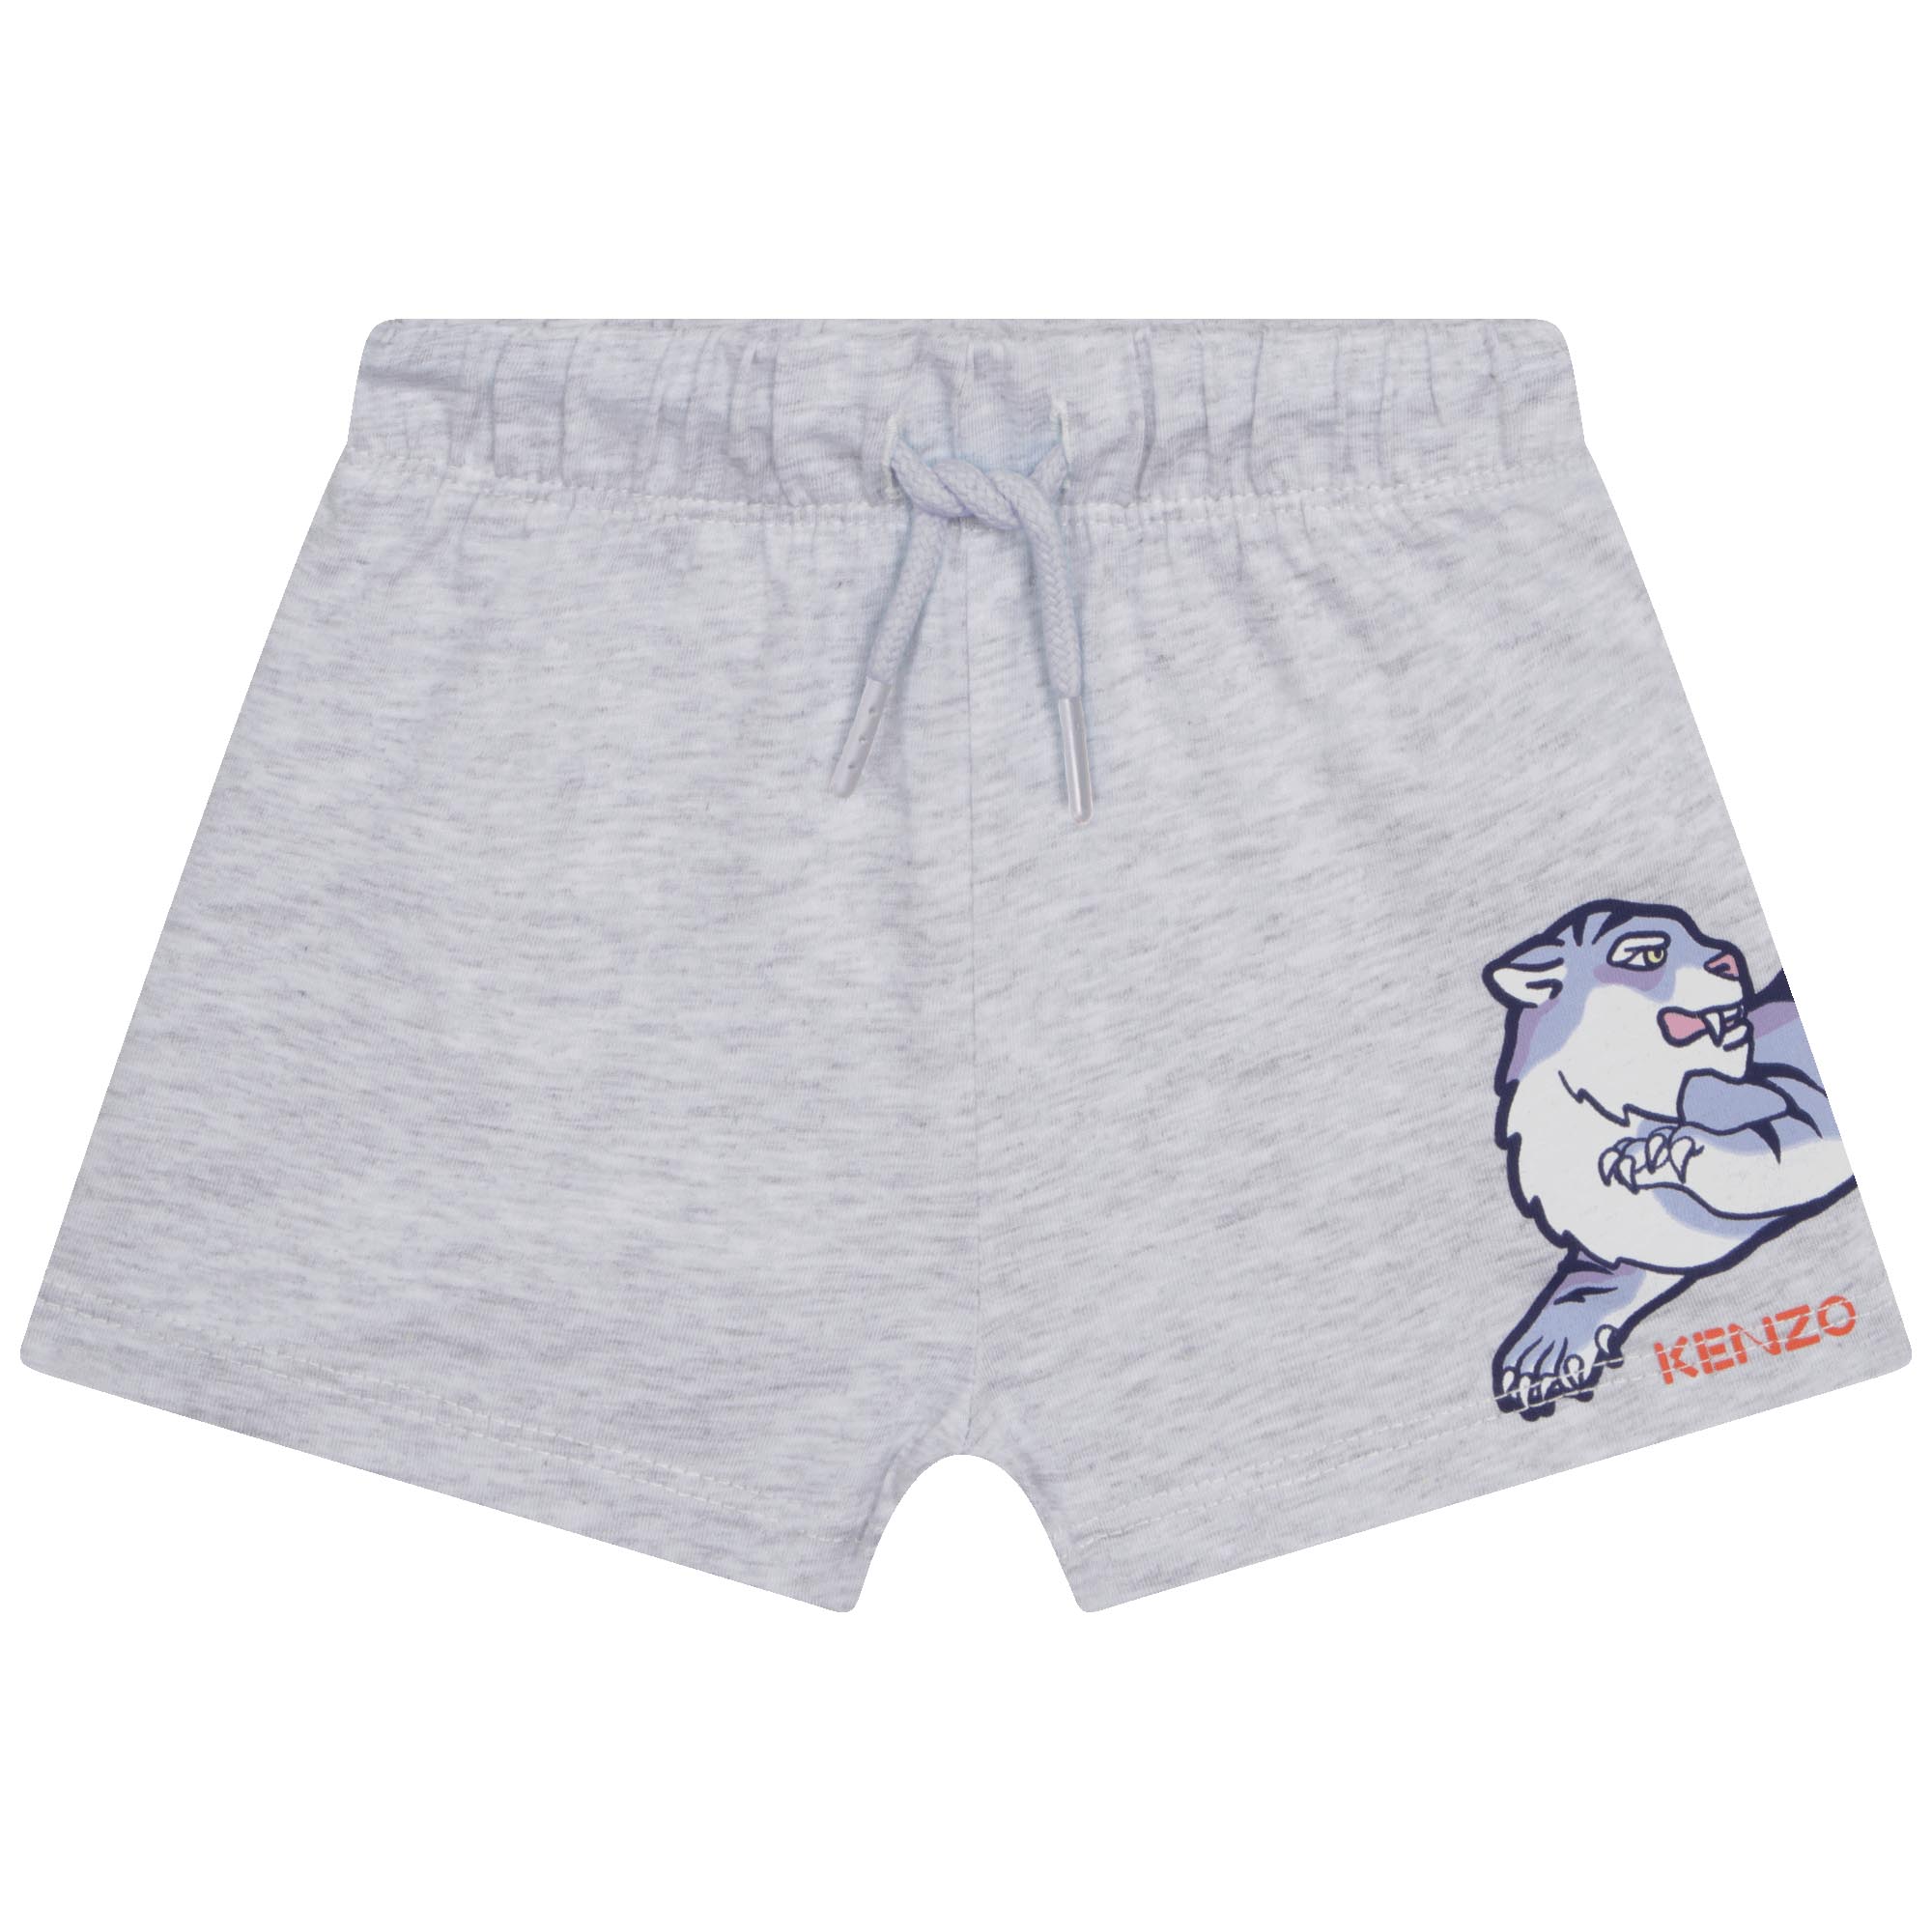 Shorts and T-shirt set KENZO KIDS for BOY